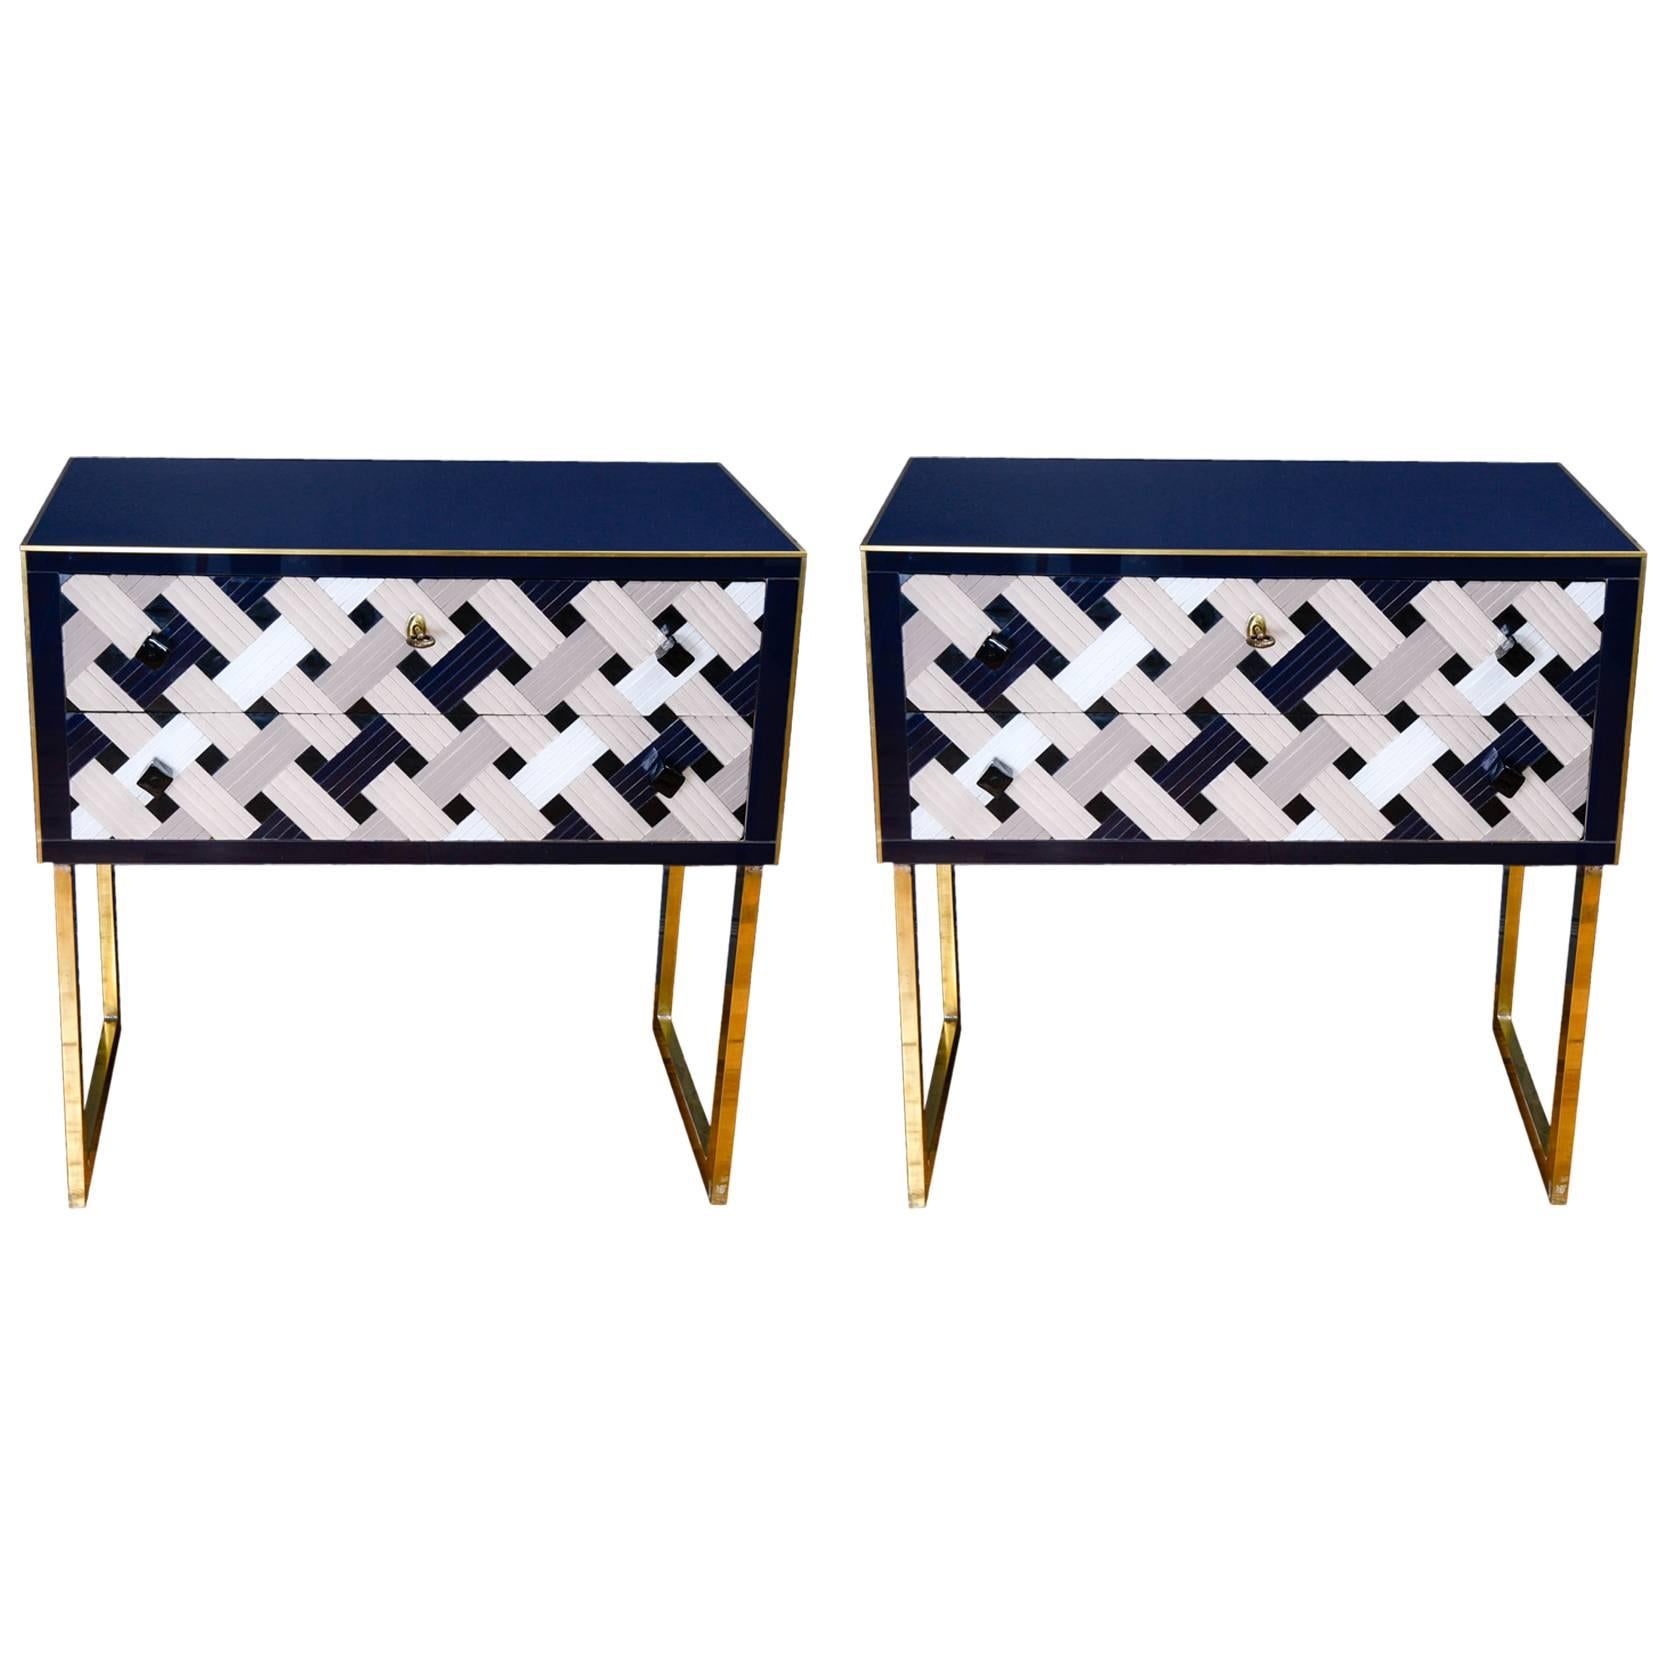  Pair of Mirrored and Brass Commodes, circa 2015